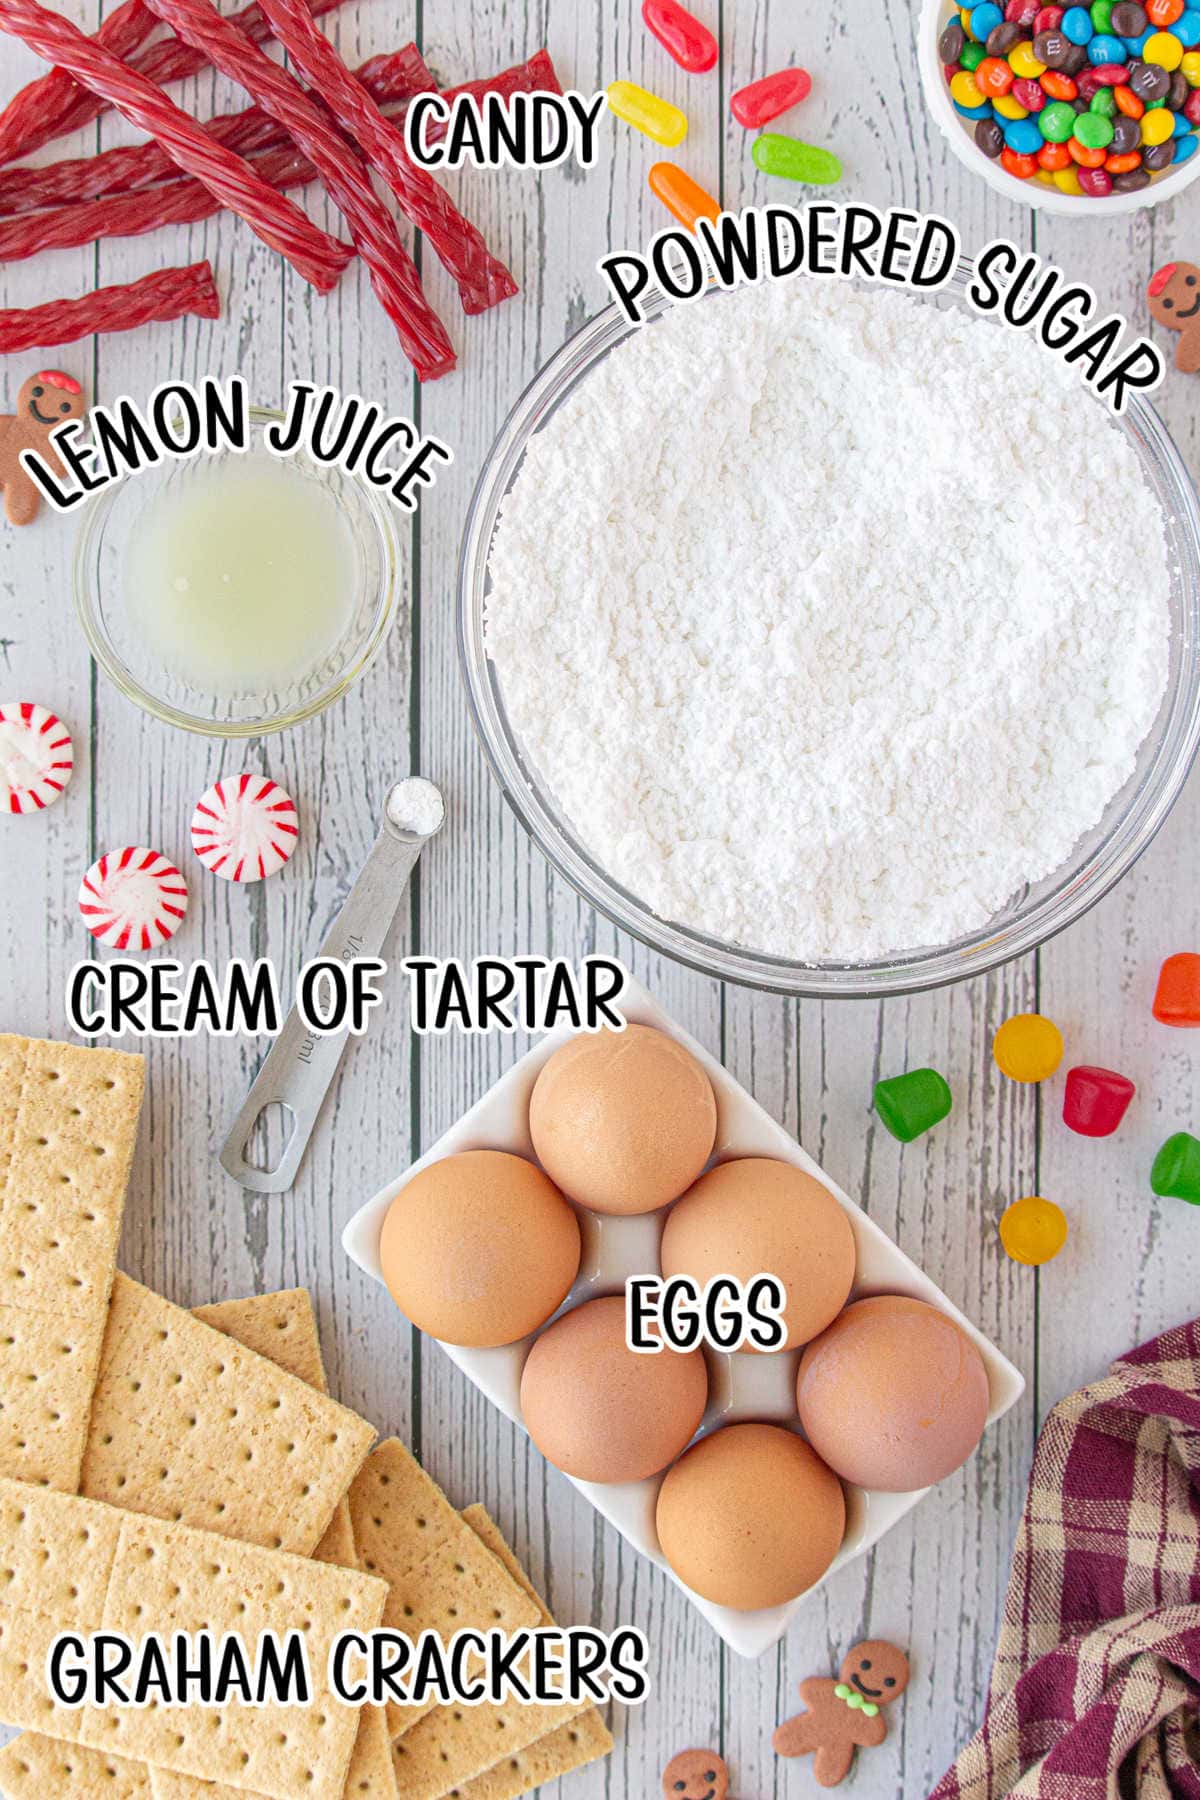 Ingredients needed for the royal icing and the gingerbread houses.